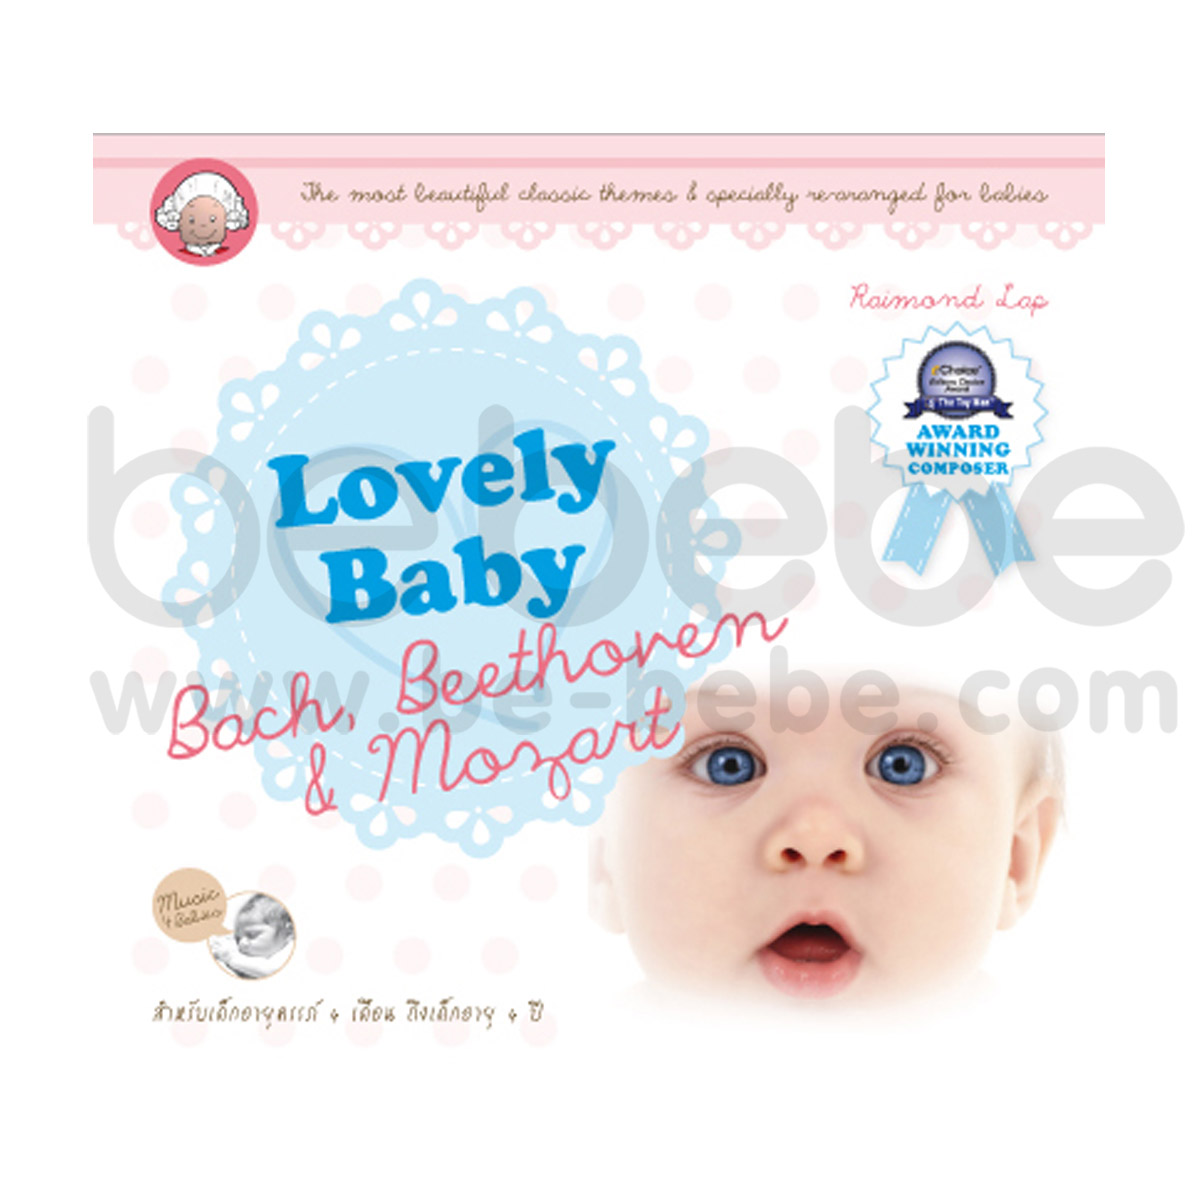 LovelyBaby : Lovely Baby Bach, Beethoven & MozartMagic (3 CD)